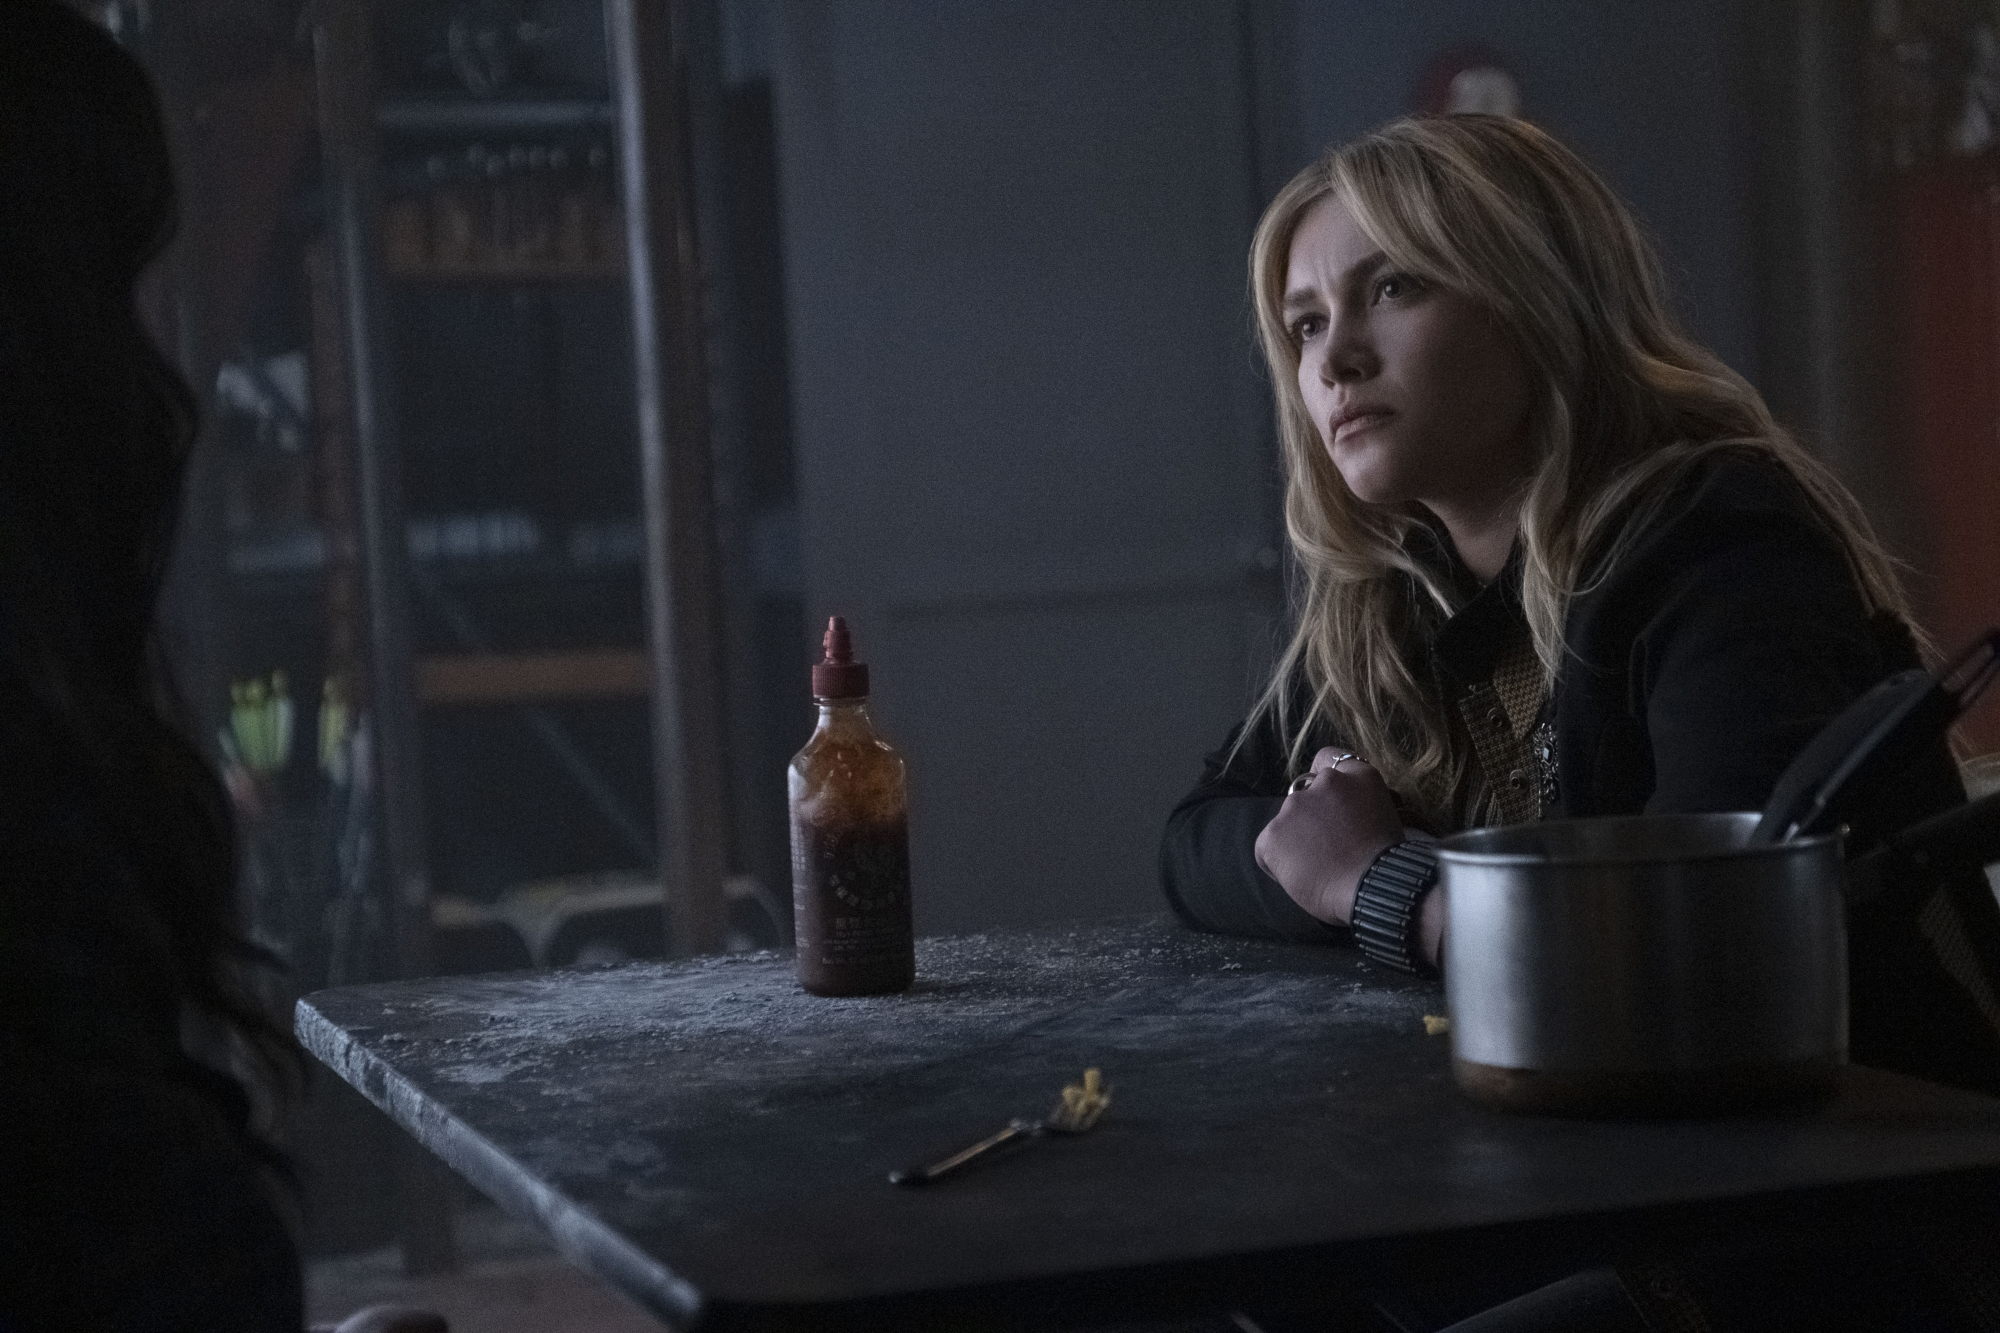 Florence Pugh as Yelena Belova in Marvel's 'Hawkeye.' She's sitting across from Kate Bishop, and there's a bottle of hot sauce next to her.